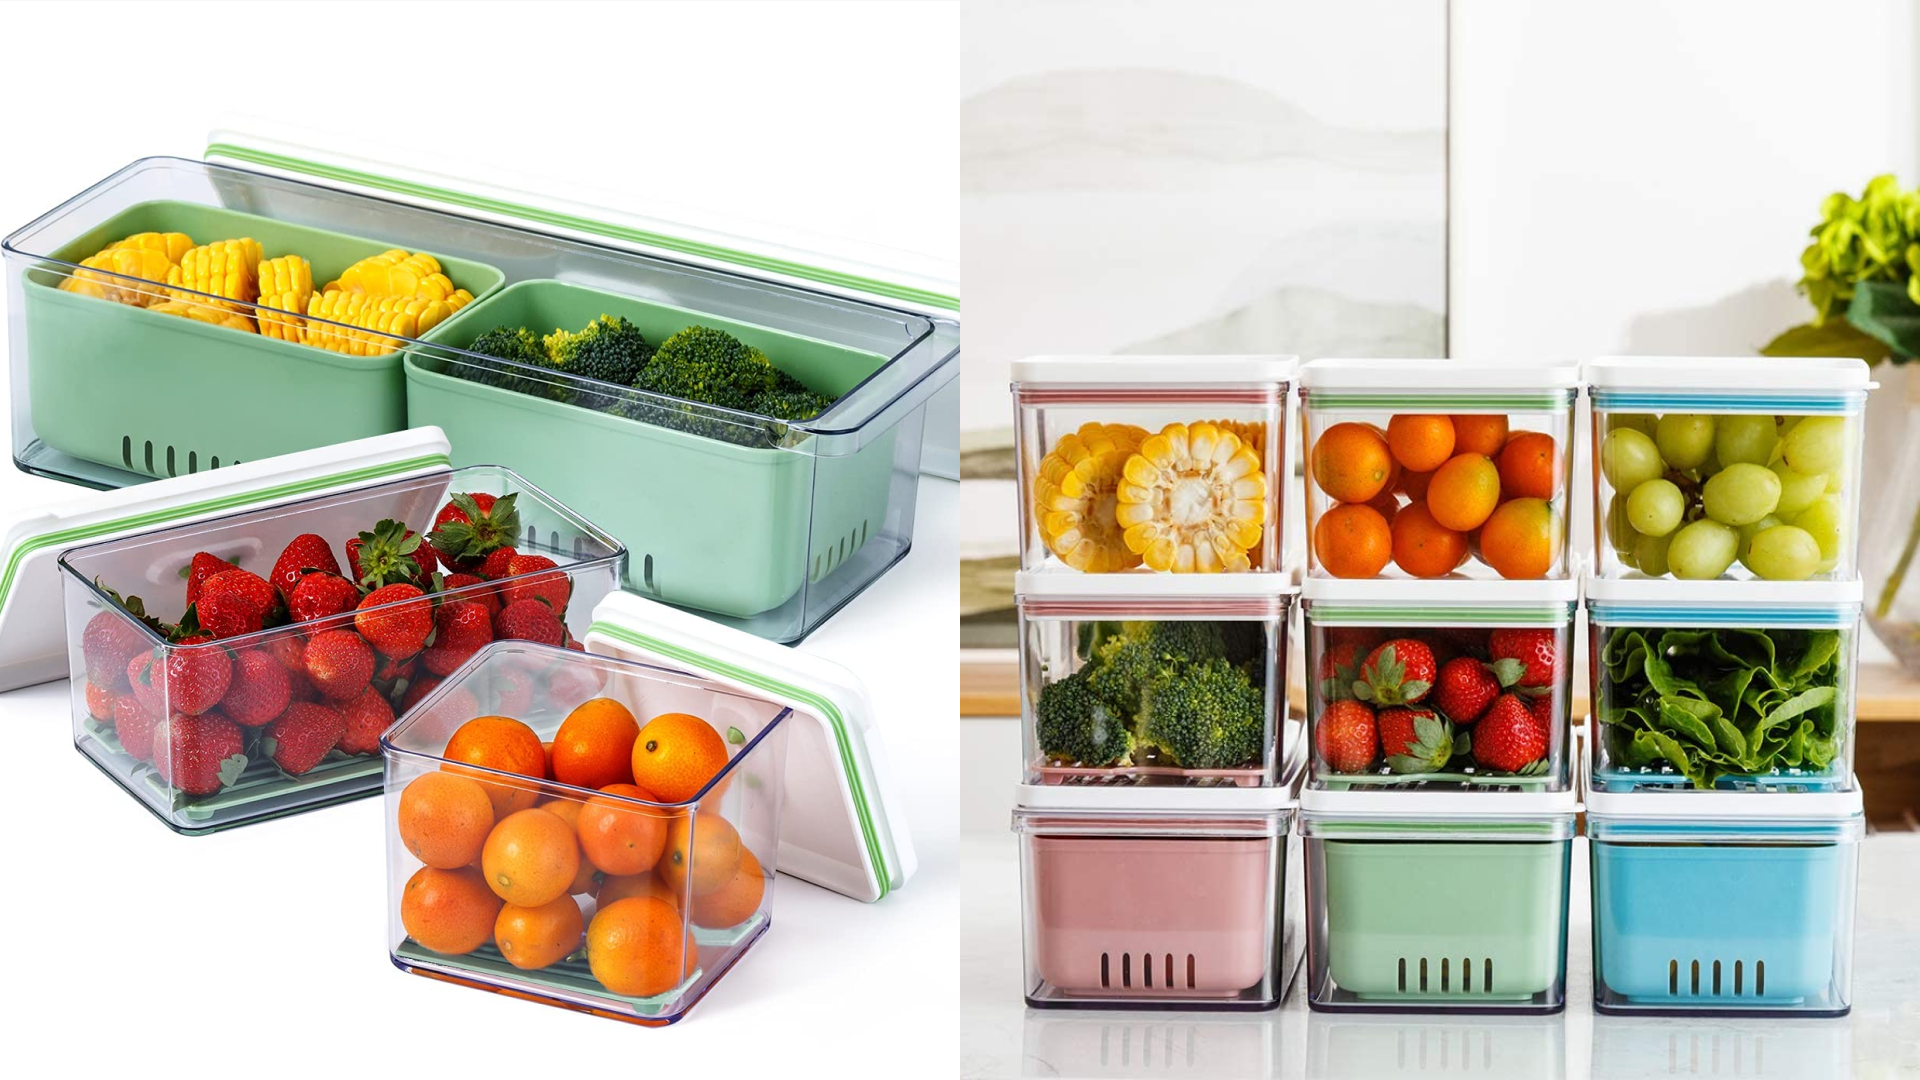 Fridge Fruit Storage Containers - Refrigerator Colander Bins for Produce  and Veggies - Easily Wash, Prep and Store Fruits and Vegetables 